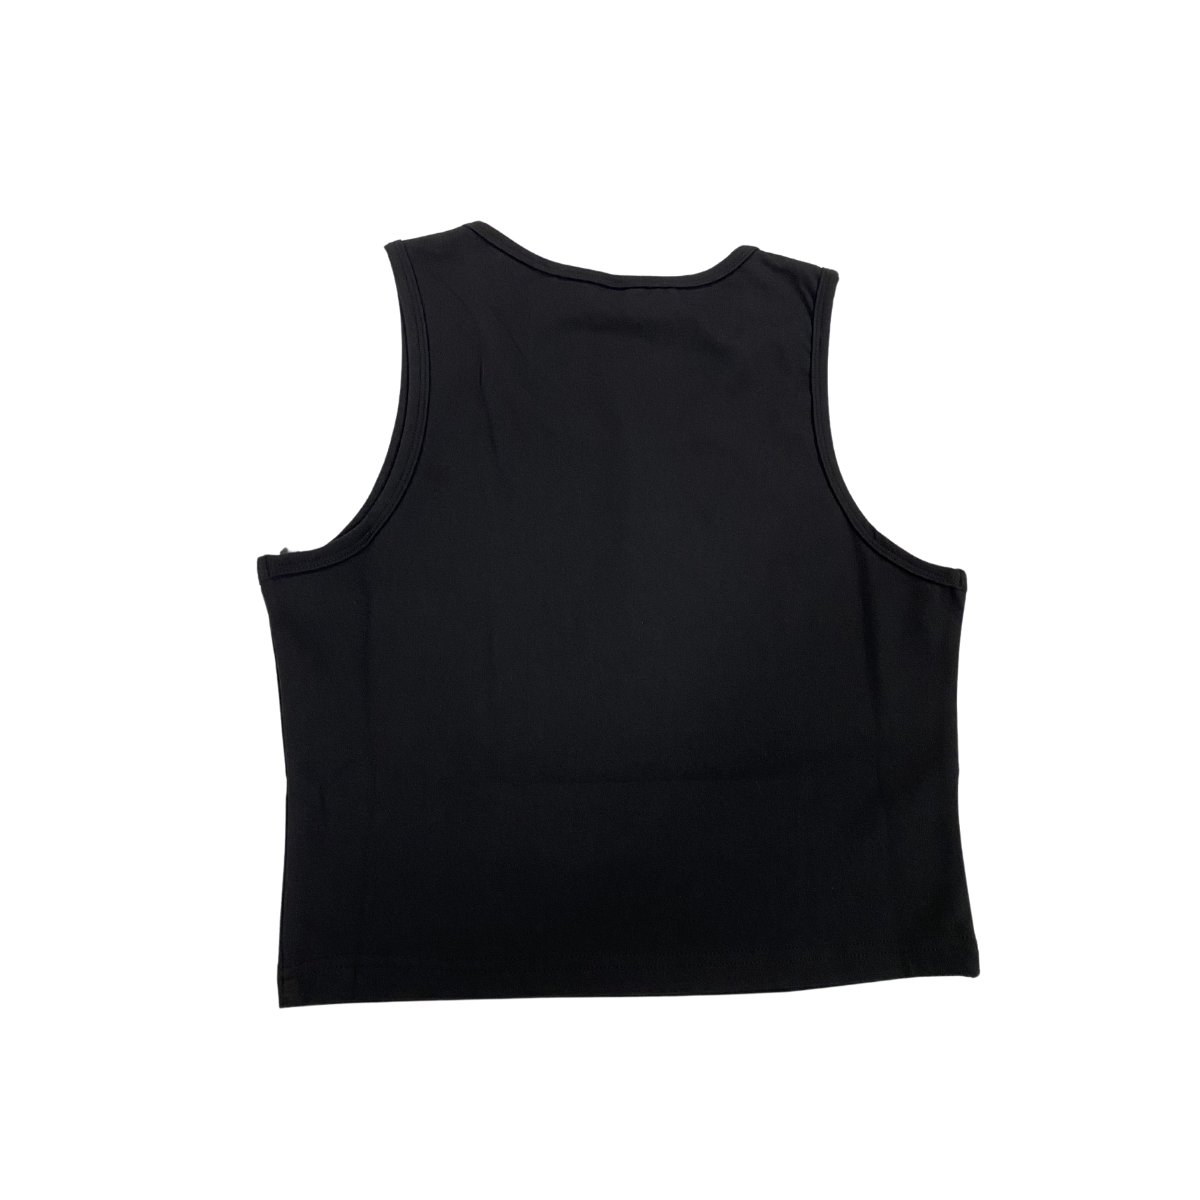 Black Cross Training Camisole-Vetements-Fit Army-XS-Canada Fighting